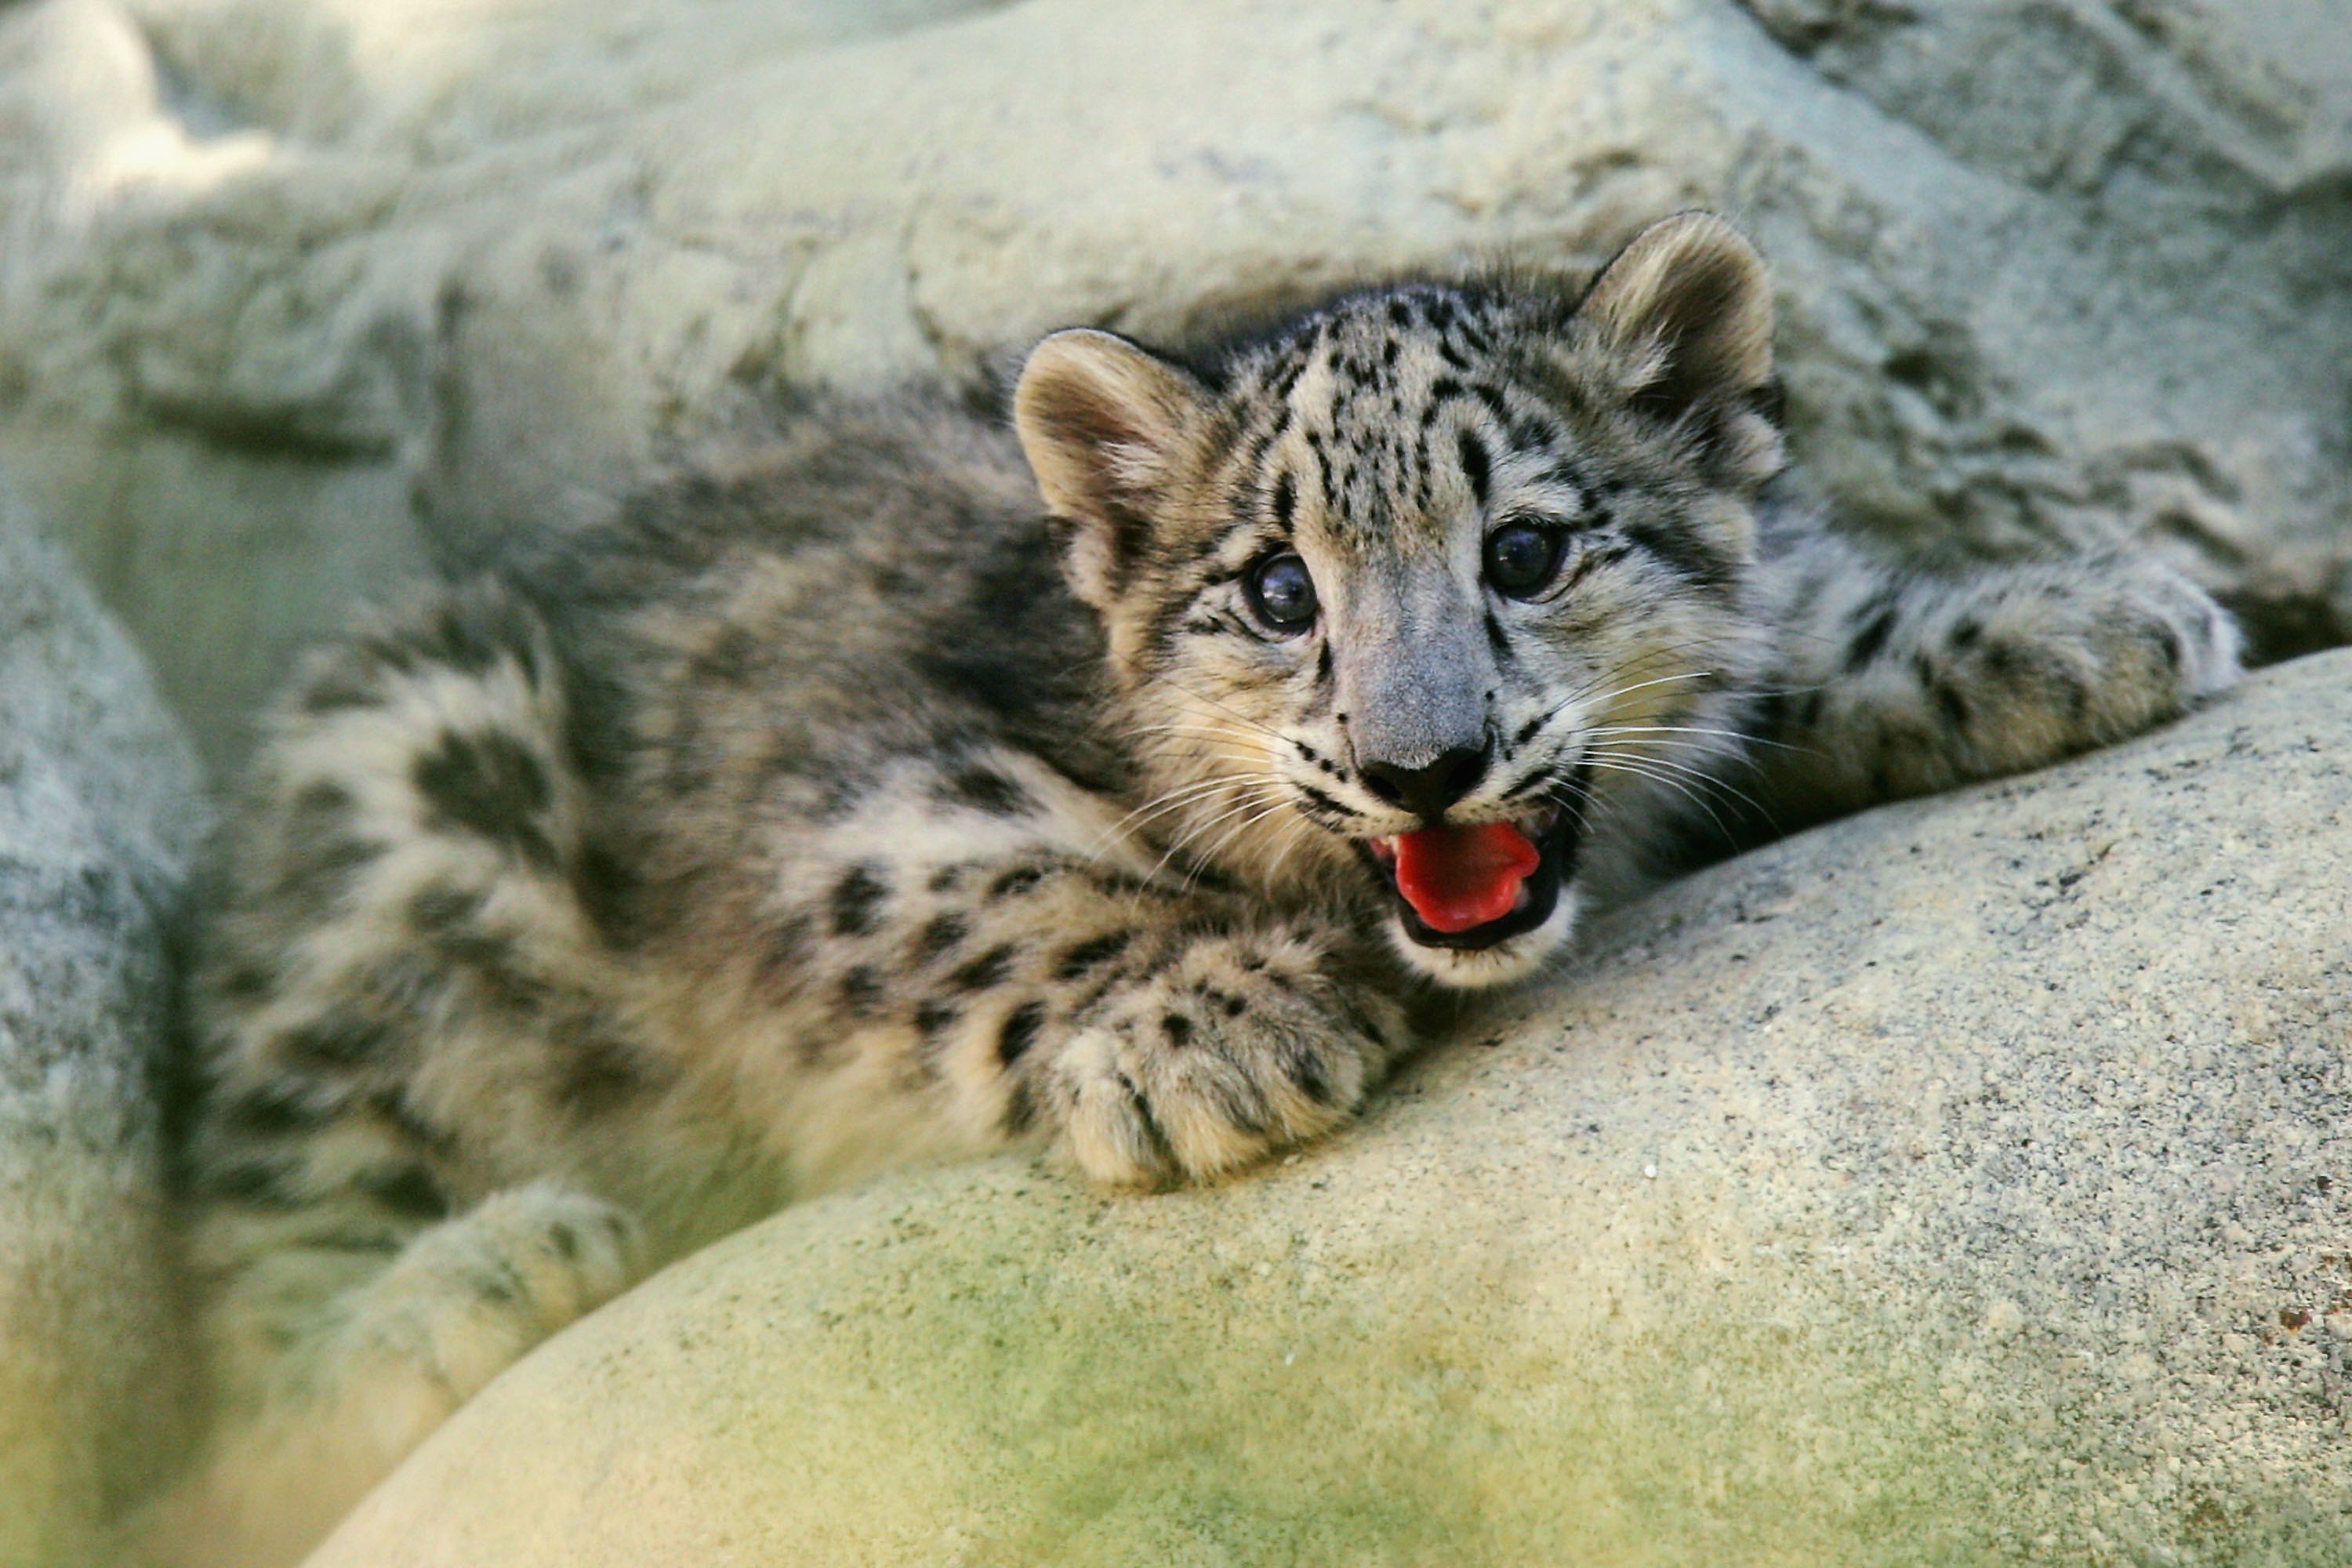 An endangered snow leopard kitten at the Los Angeles Zoo on Sept.  7, 2006 (David McNew&mdash;Getty Images)